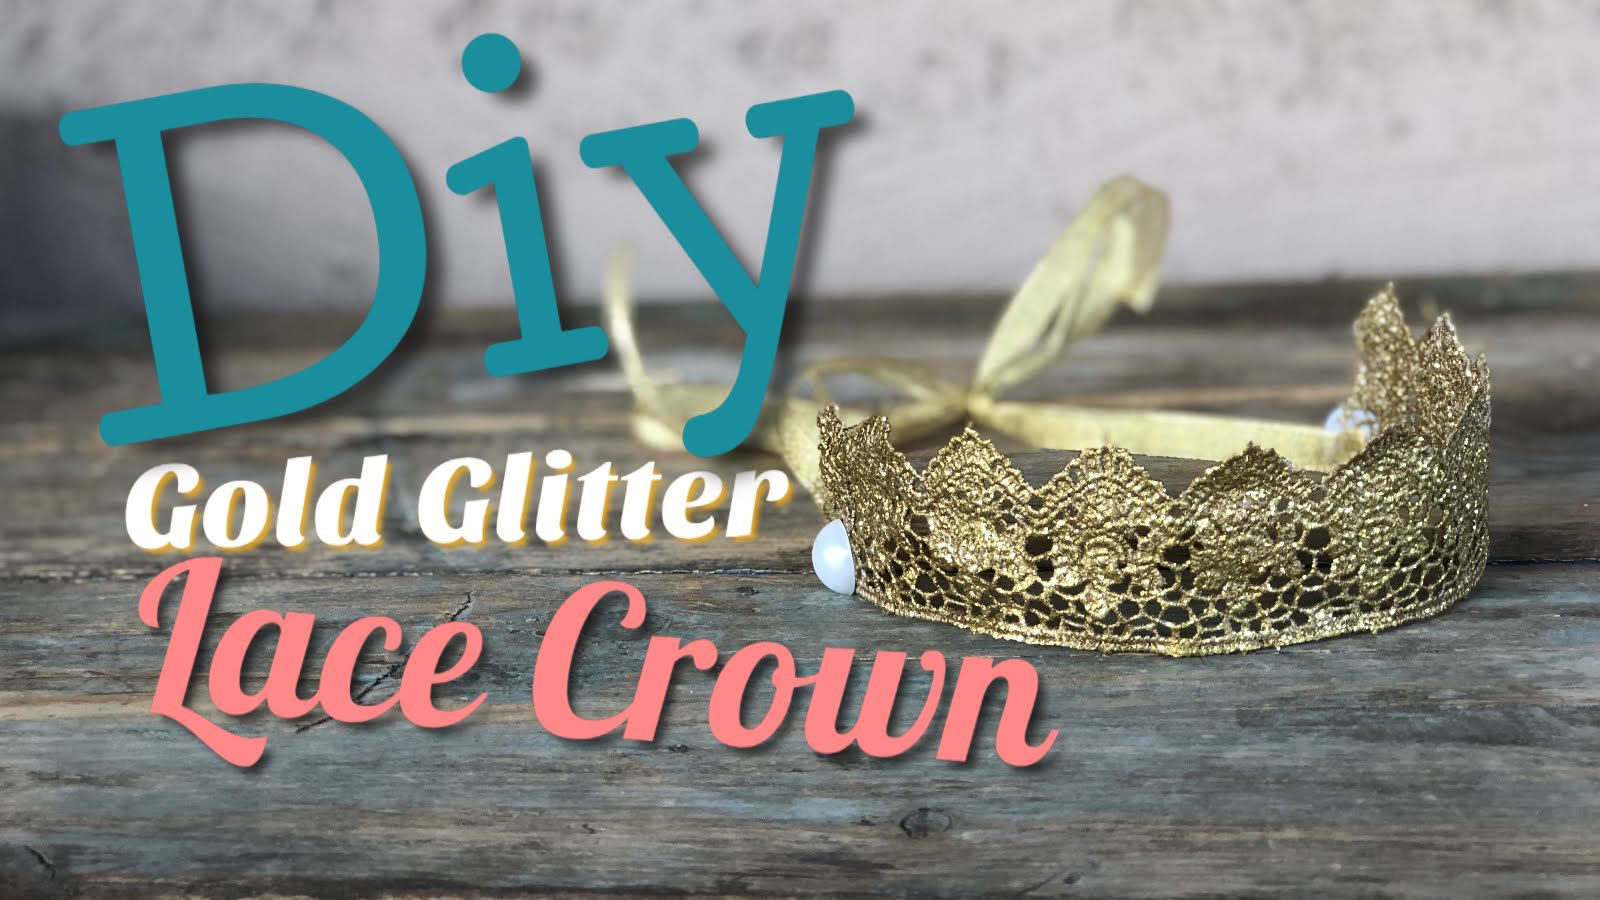 Load video: How to make a glitter lace crown headpiece.